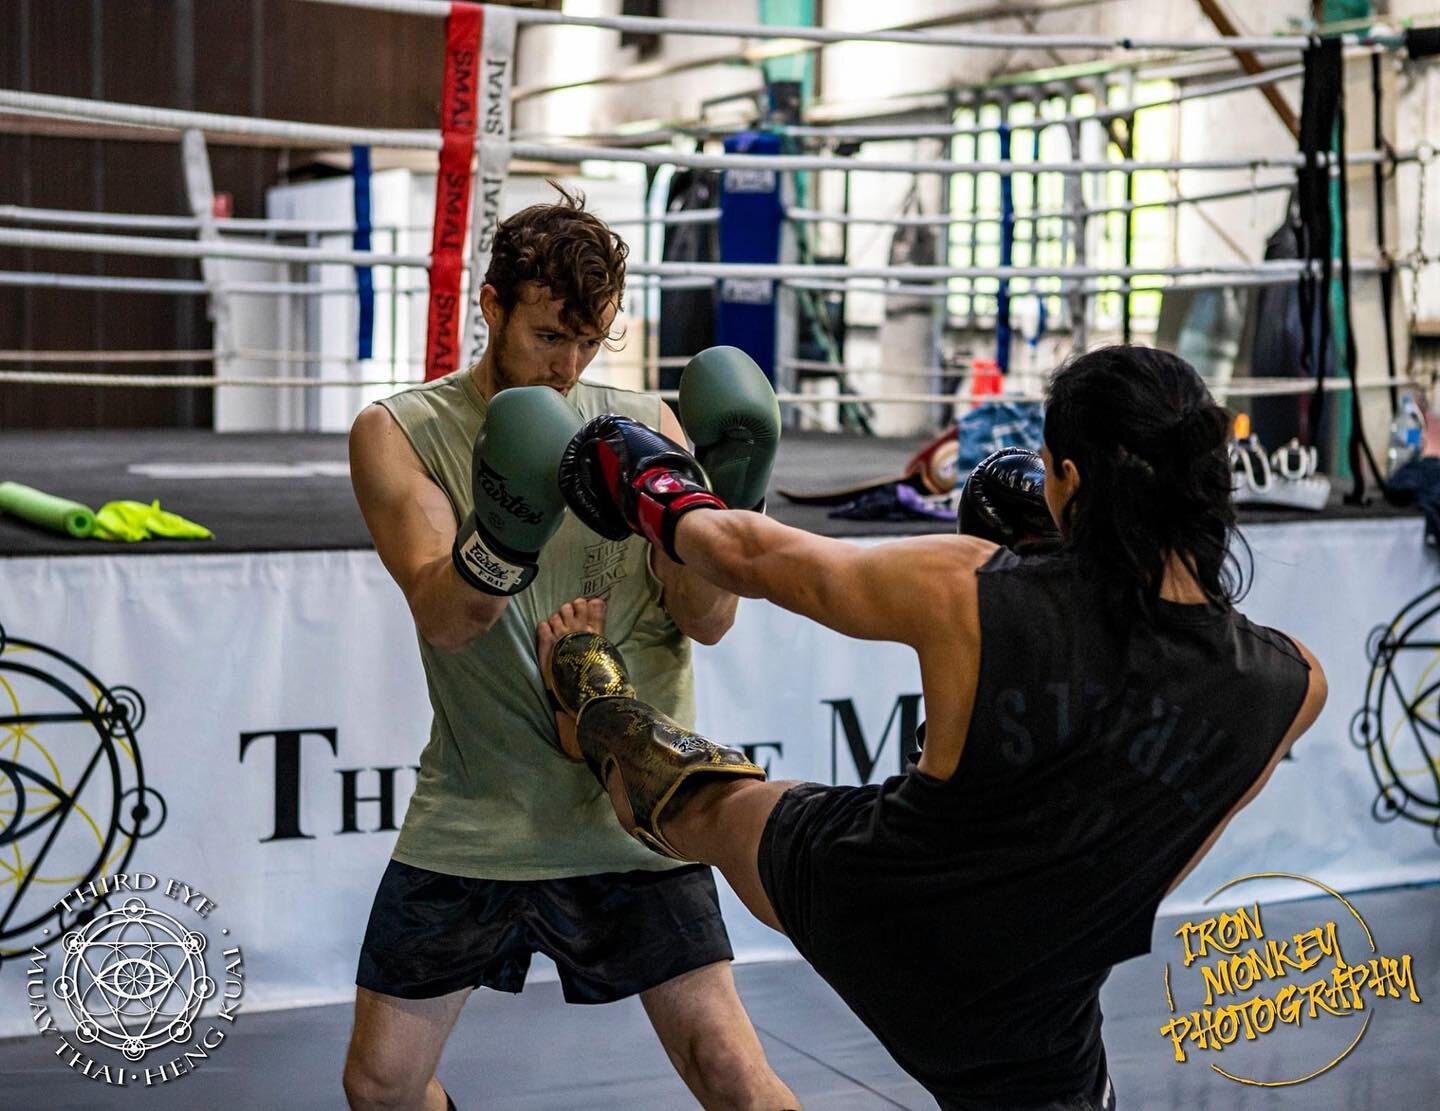 Teep away those Monday blues!

Young warriors 5pm - 545pm
Intermediates 6pm - 7pm
Beginners Muay Thai 7pm - 8pm

Hope to see you there!

📷 @ironmonkeyphoto